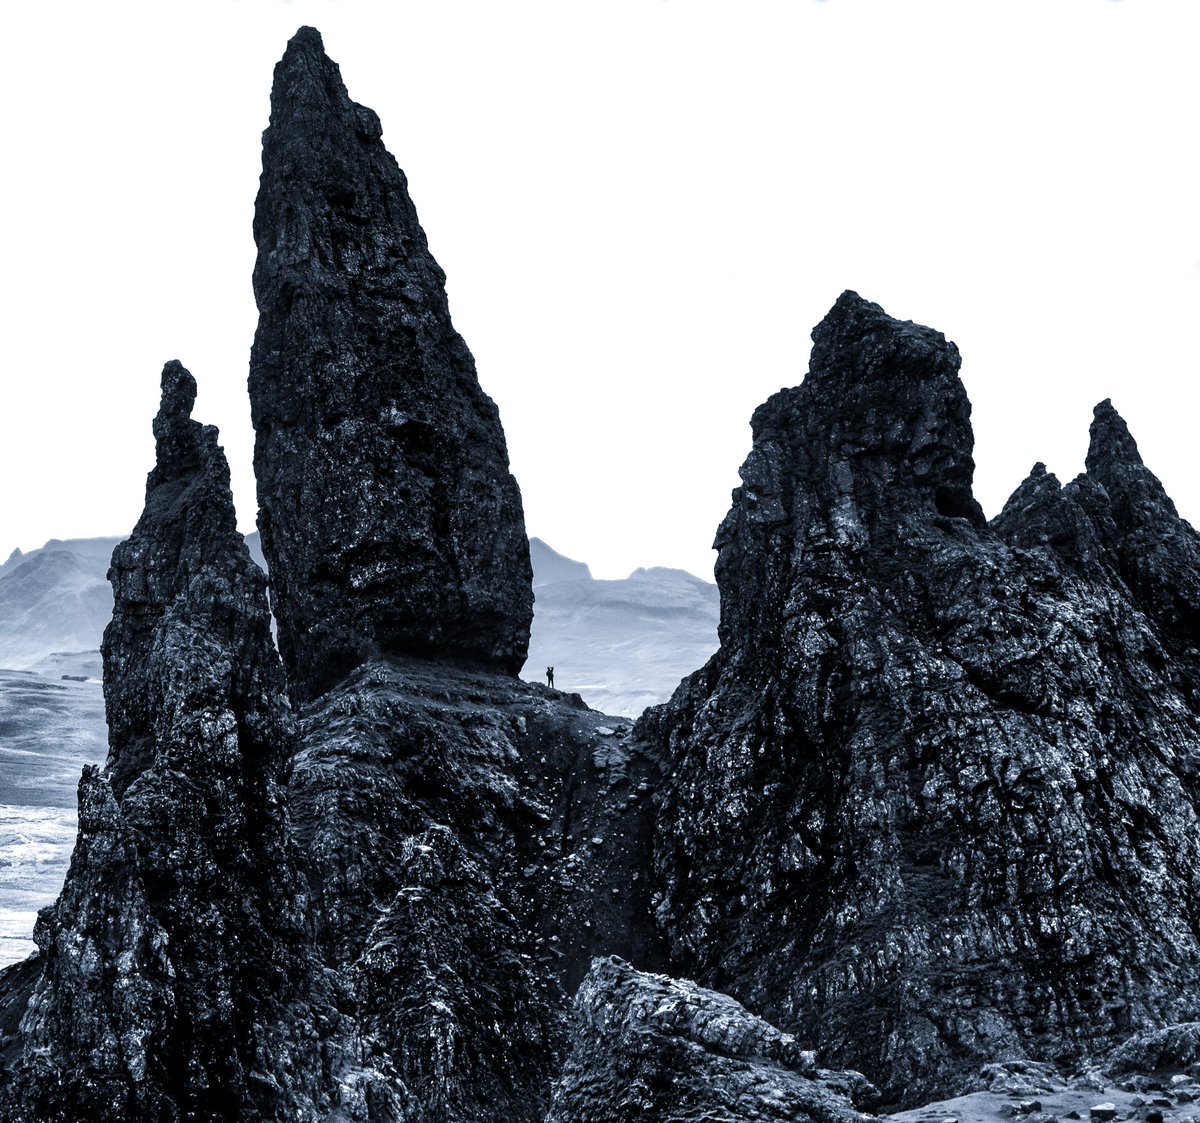 The stunning Old Man Of Storr, the Isle of Skye. Perspective  between an actual man and Storr itself. Incredible! 
#storr #Skye #photography
 kevinjamesimagestudio.co.uk